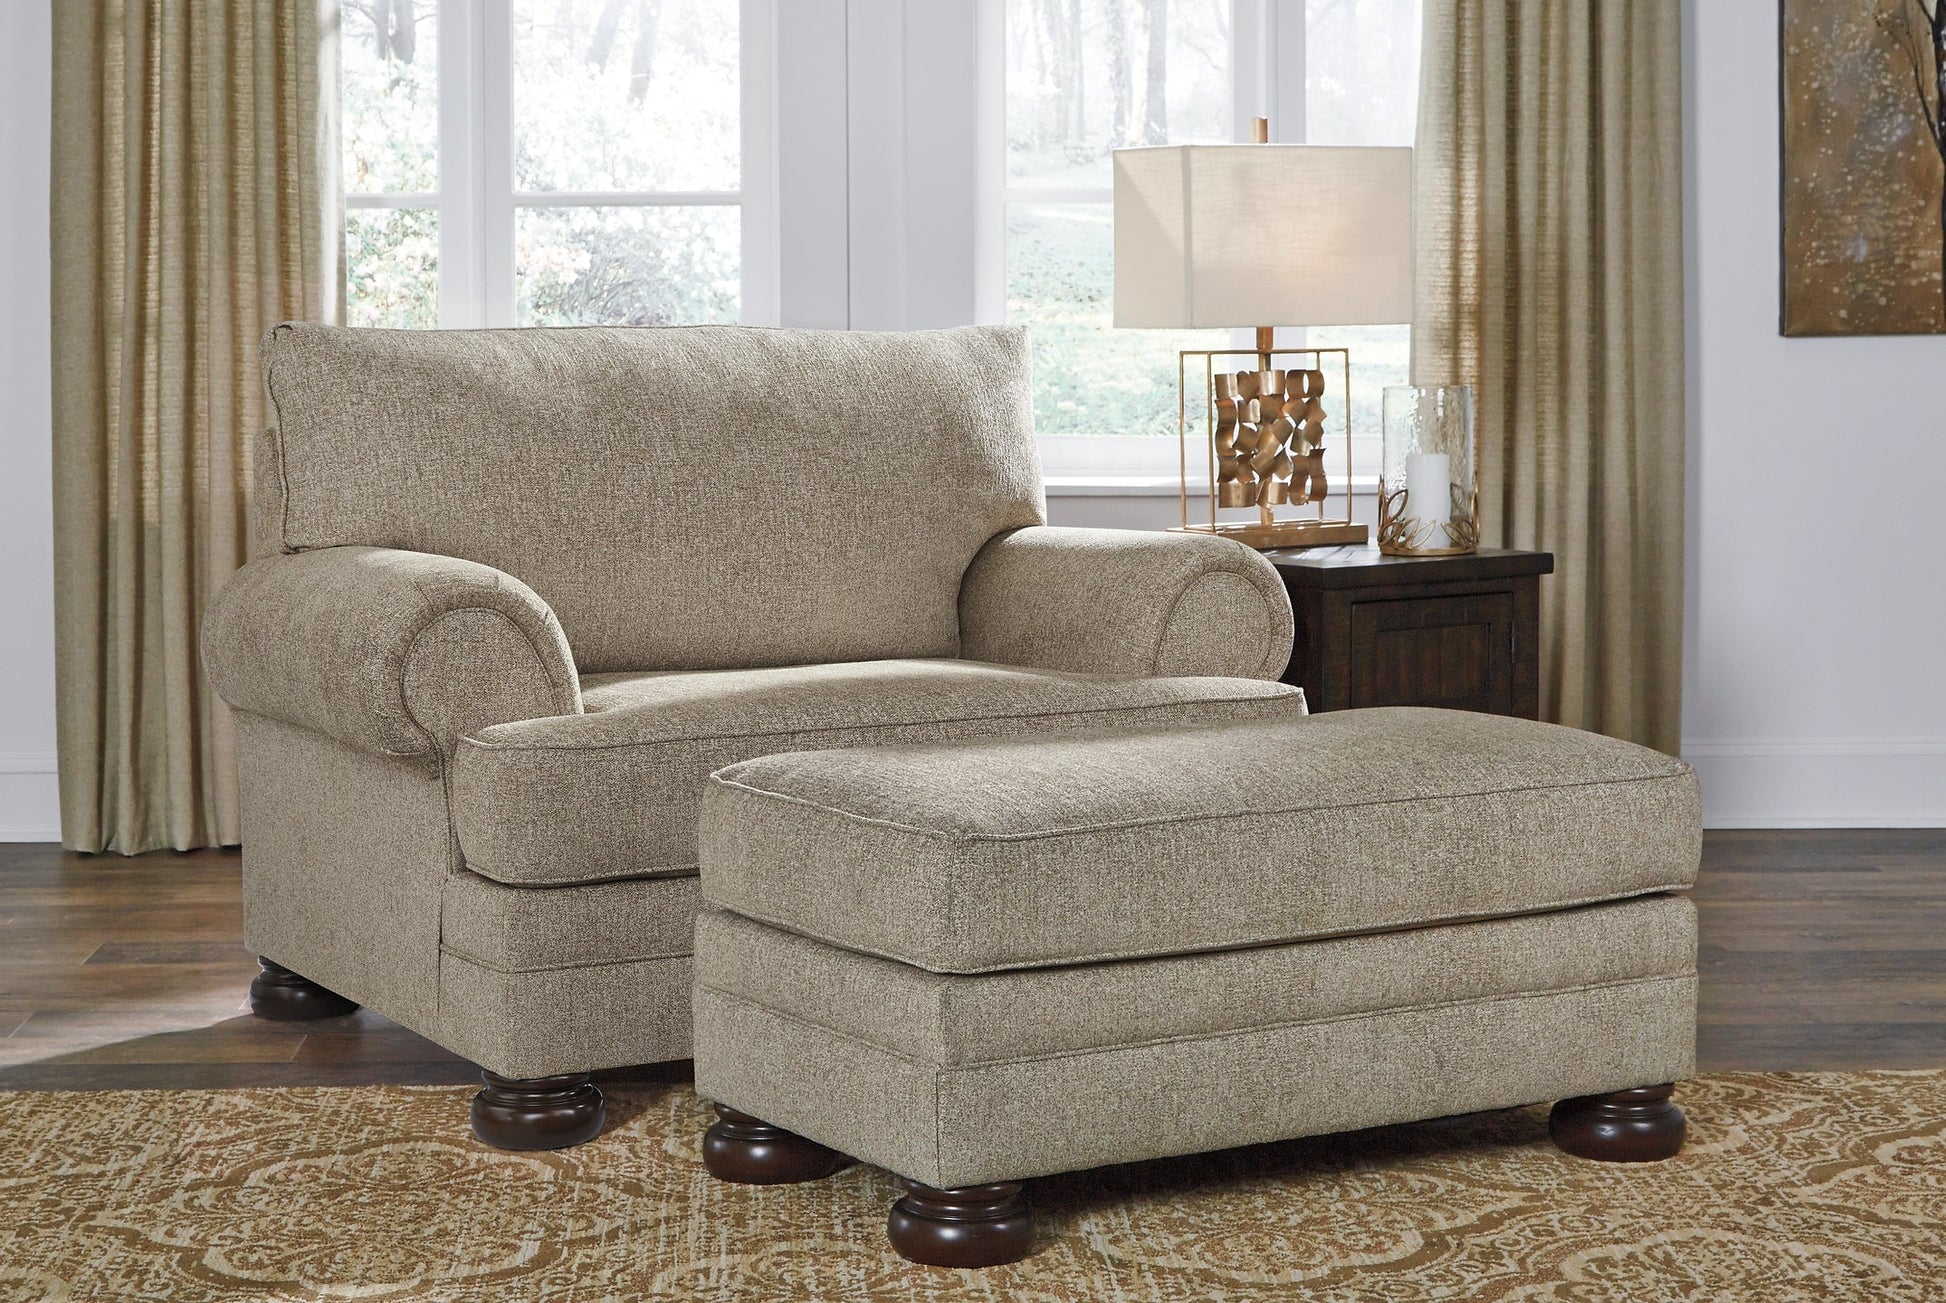 Kananwood Chair and Ottoman Rent Wise Rent To Own Jacksonville, Florida